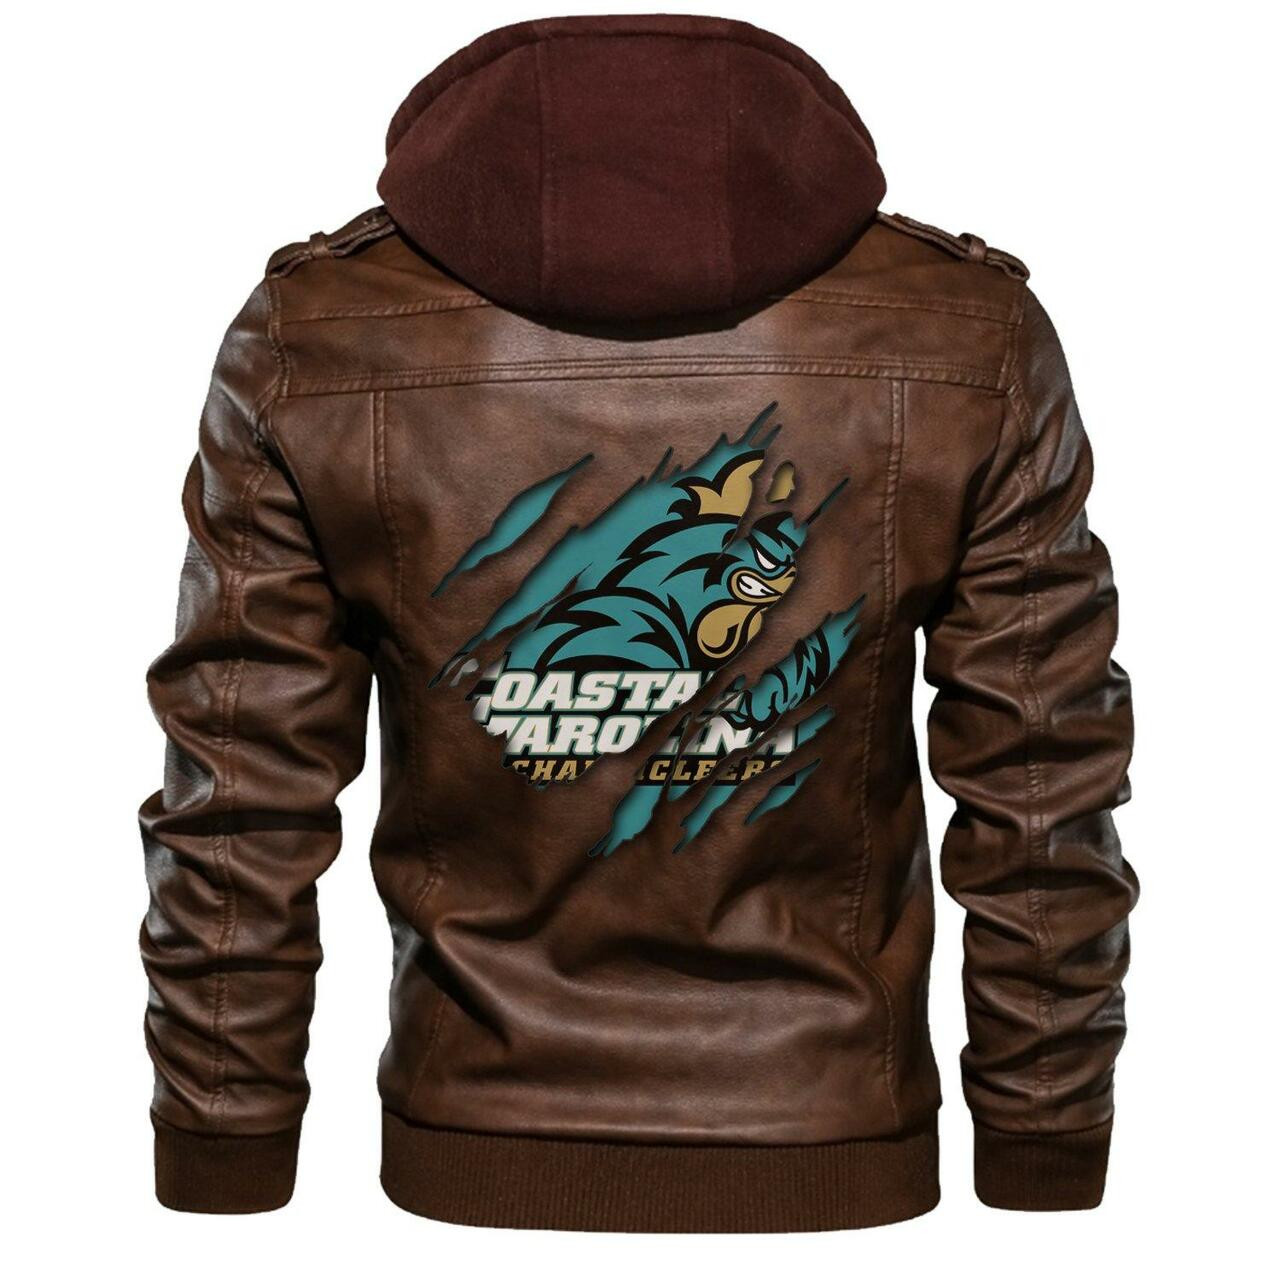 To get a great look, consider purchasing This New Leather Jacket 24